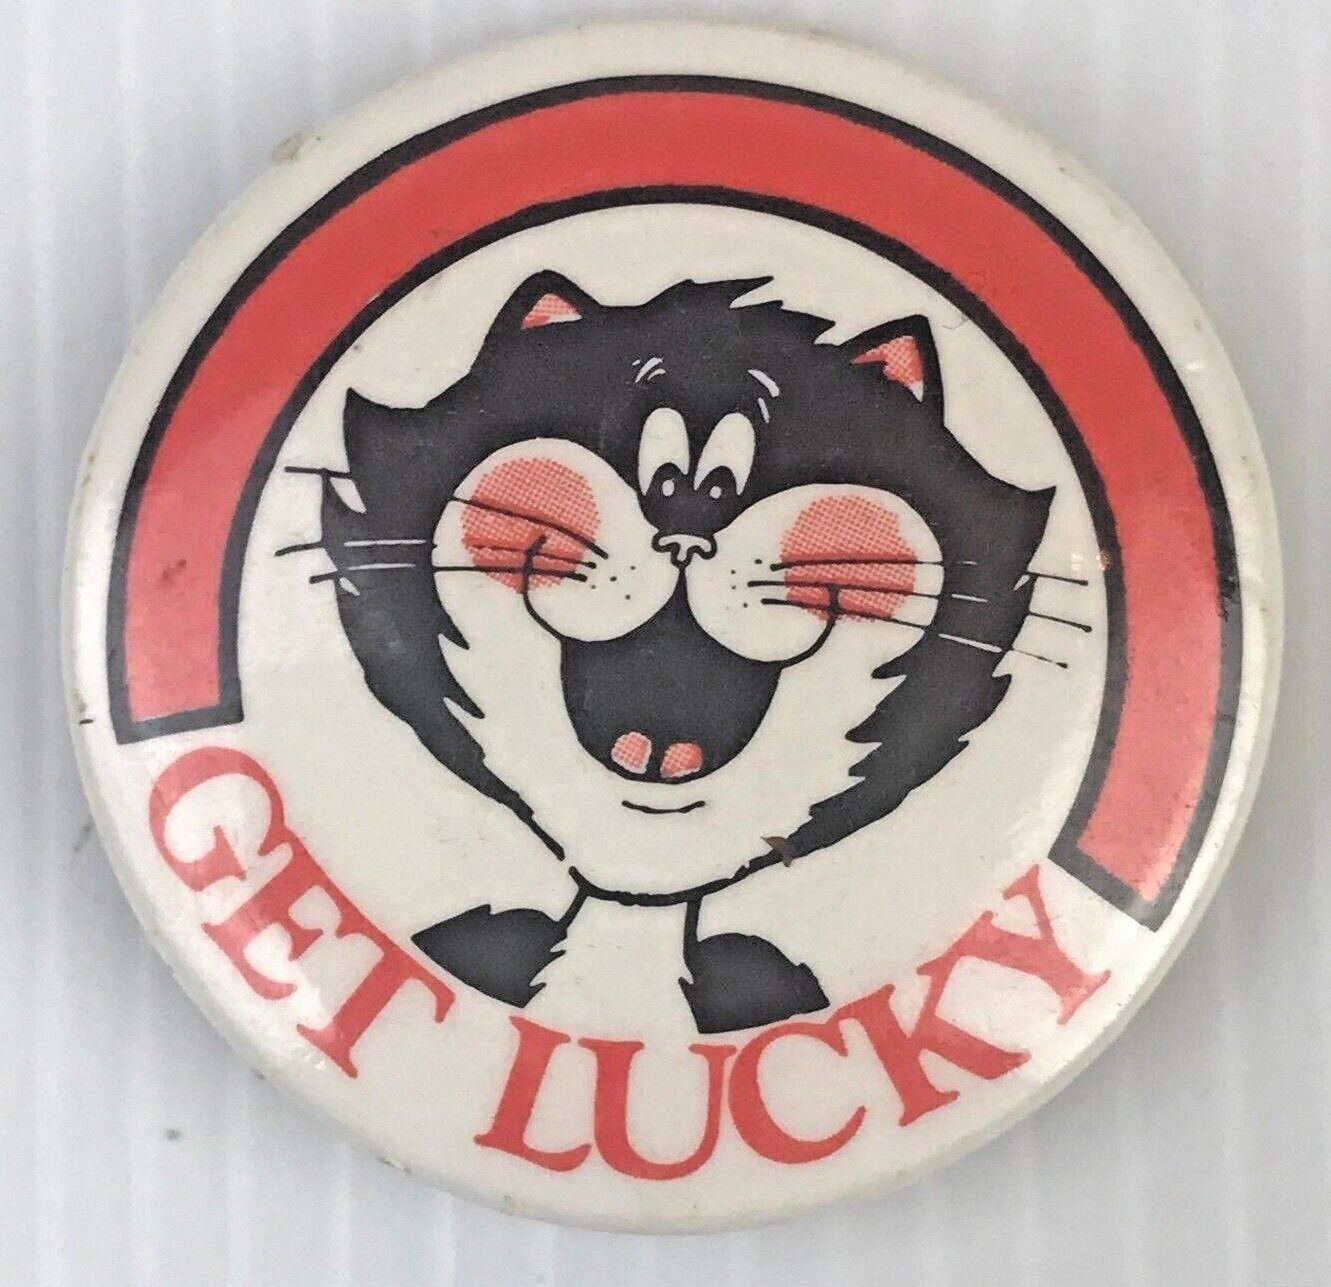 Get Lucky Vintage 1980s Pin Badge